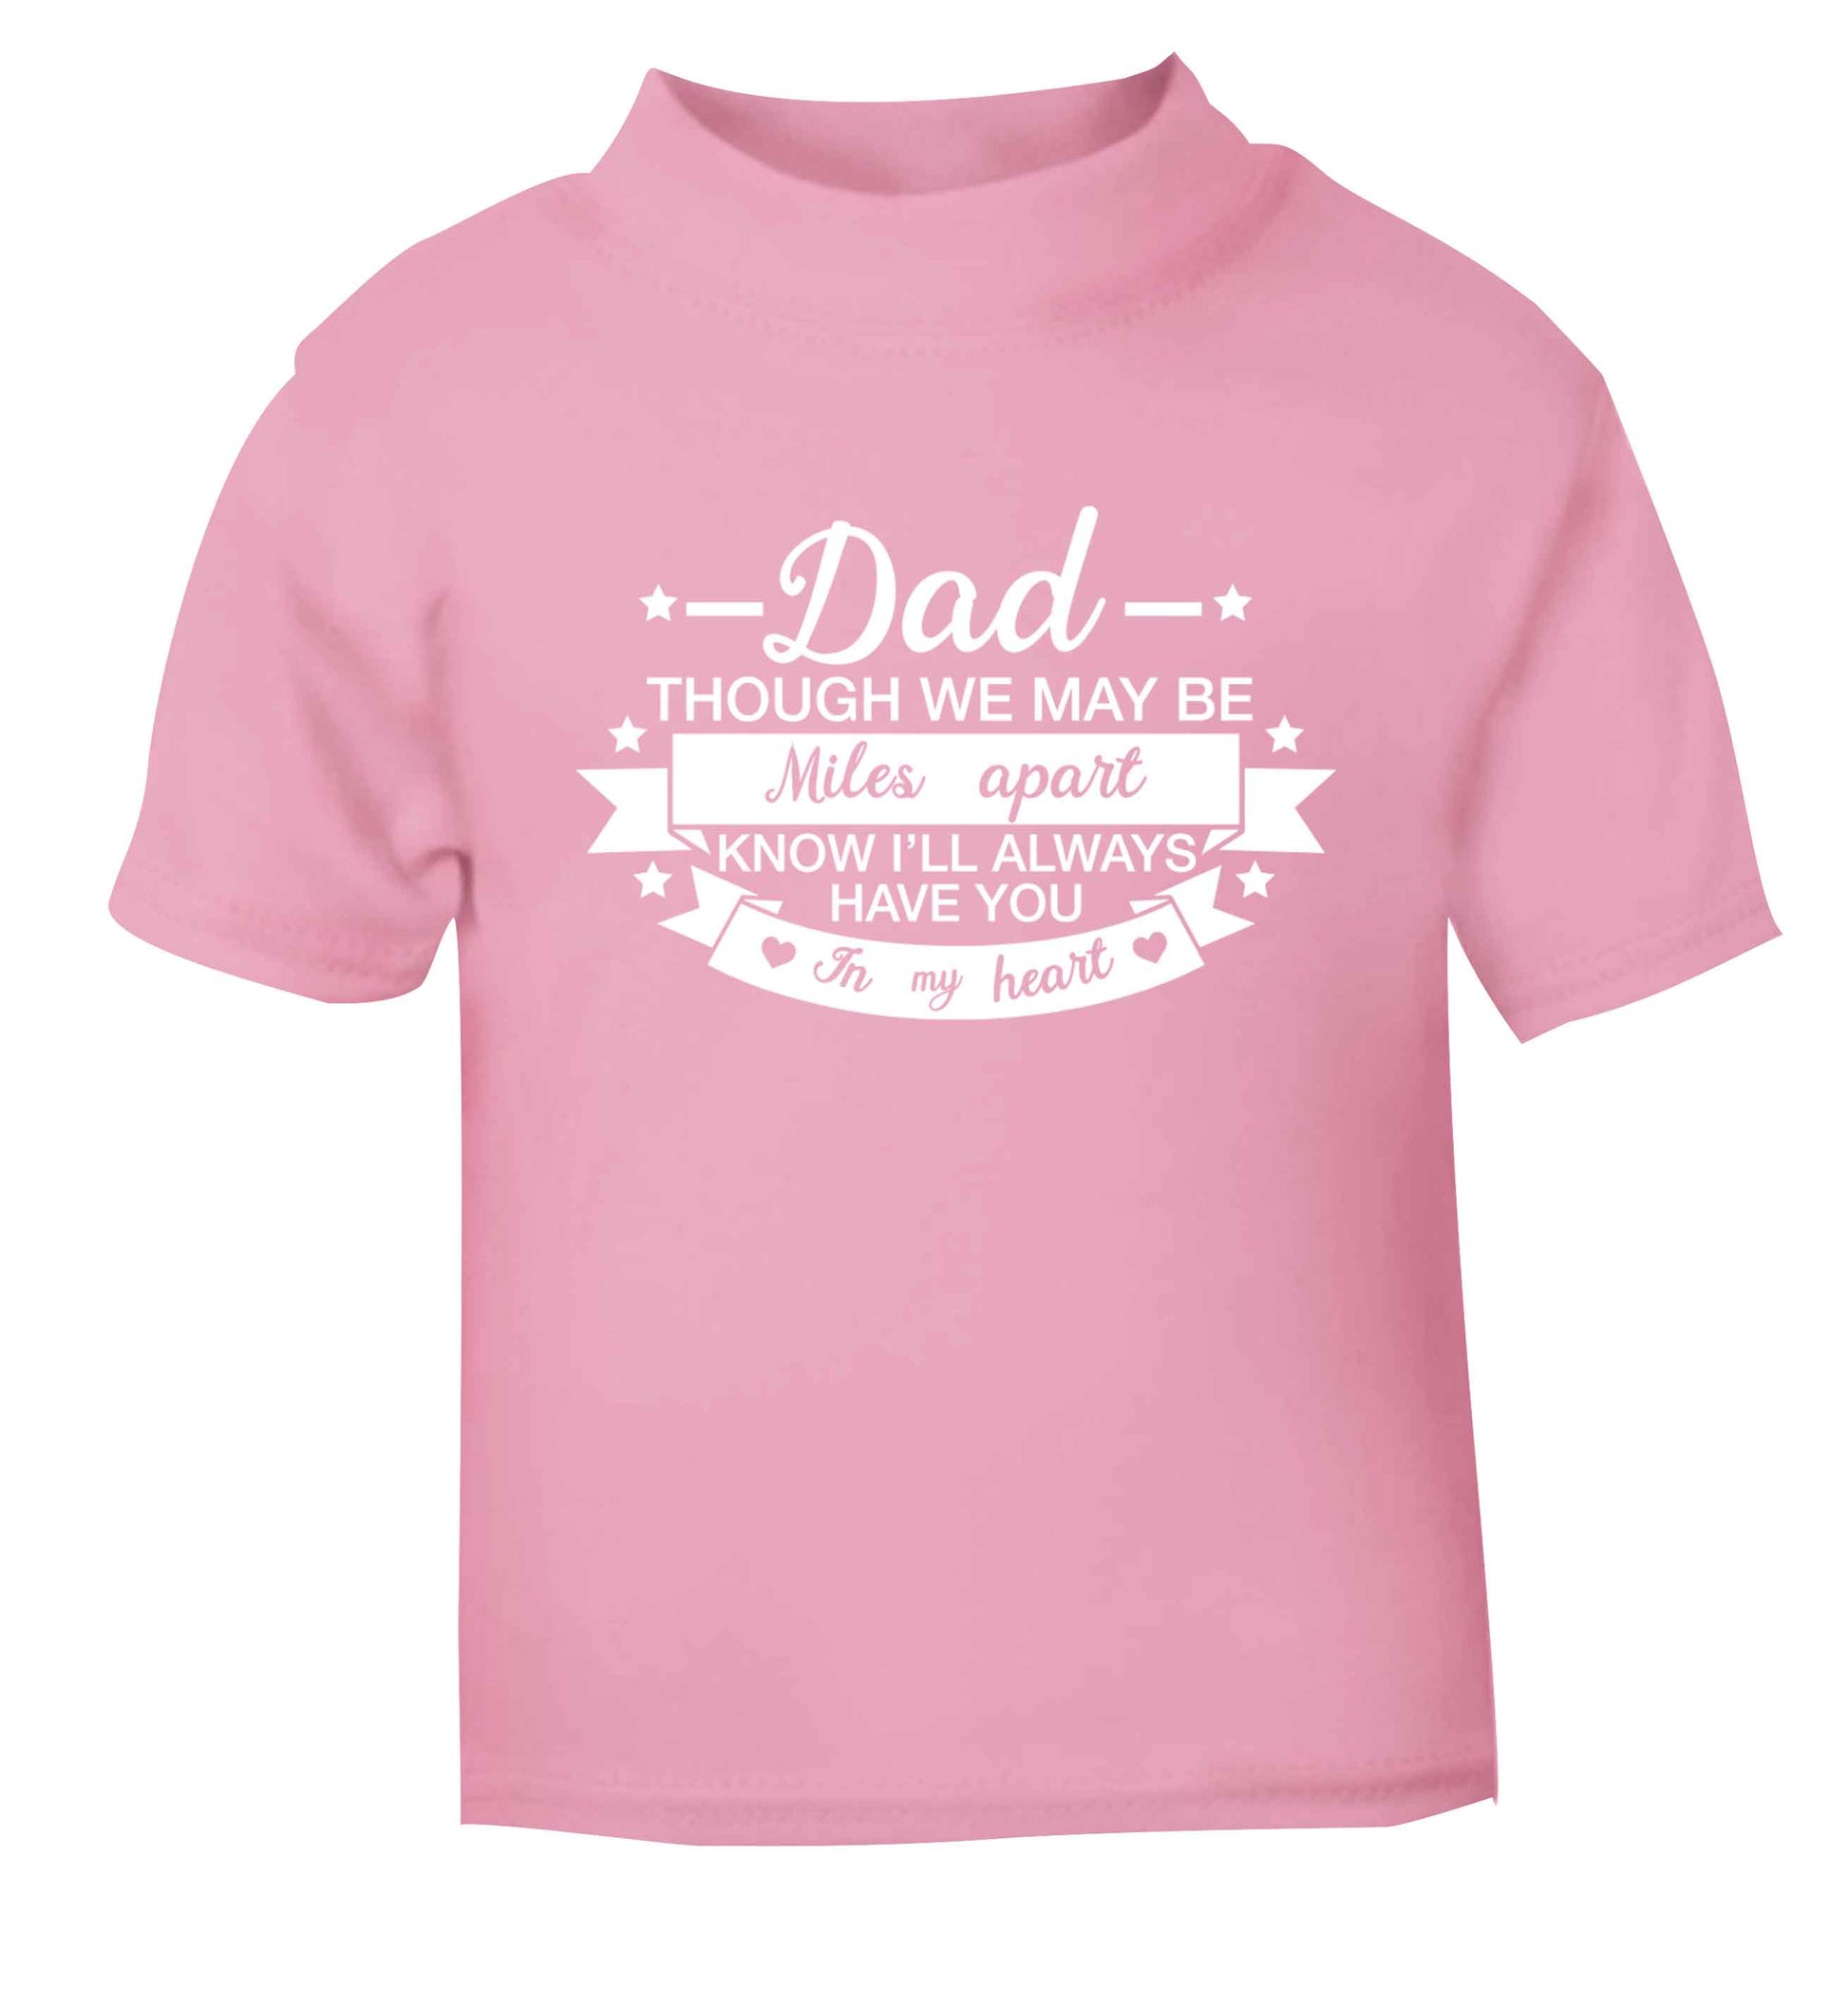 Dad though we are miles apart know I'll always have you in my heart light pink baby toddler Tshirt 2 Years